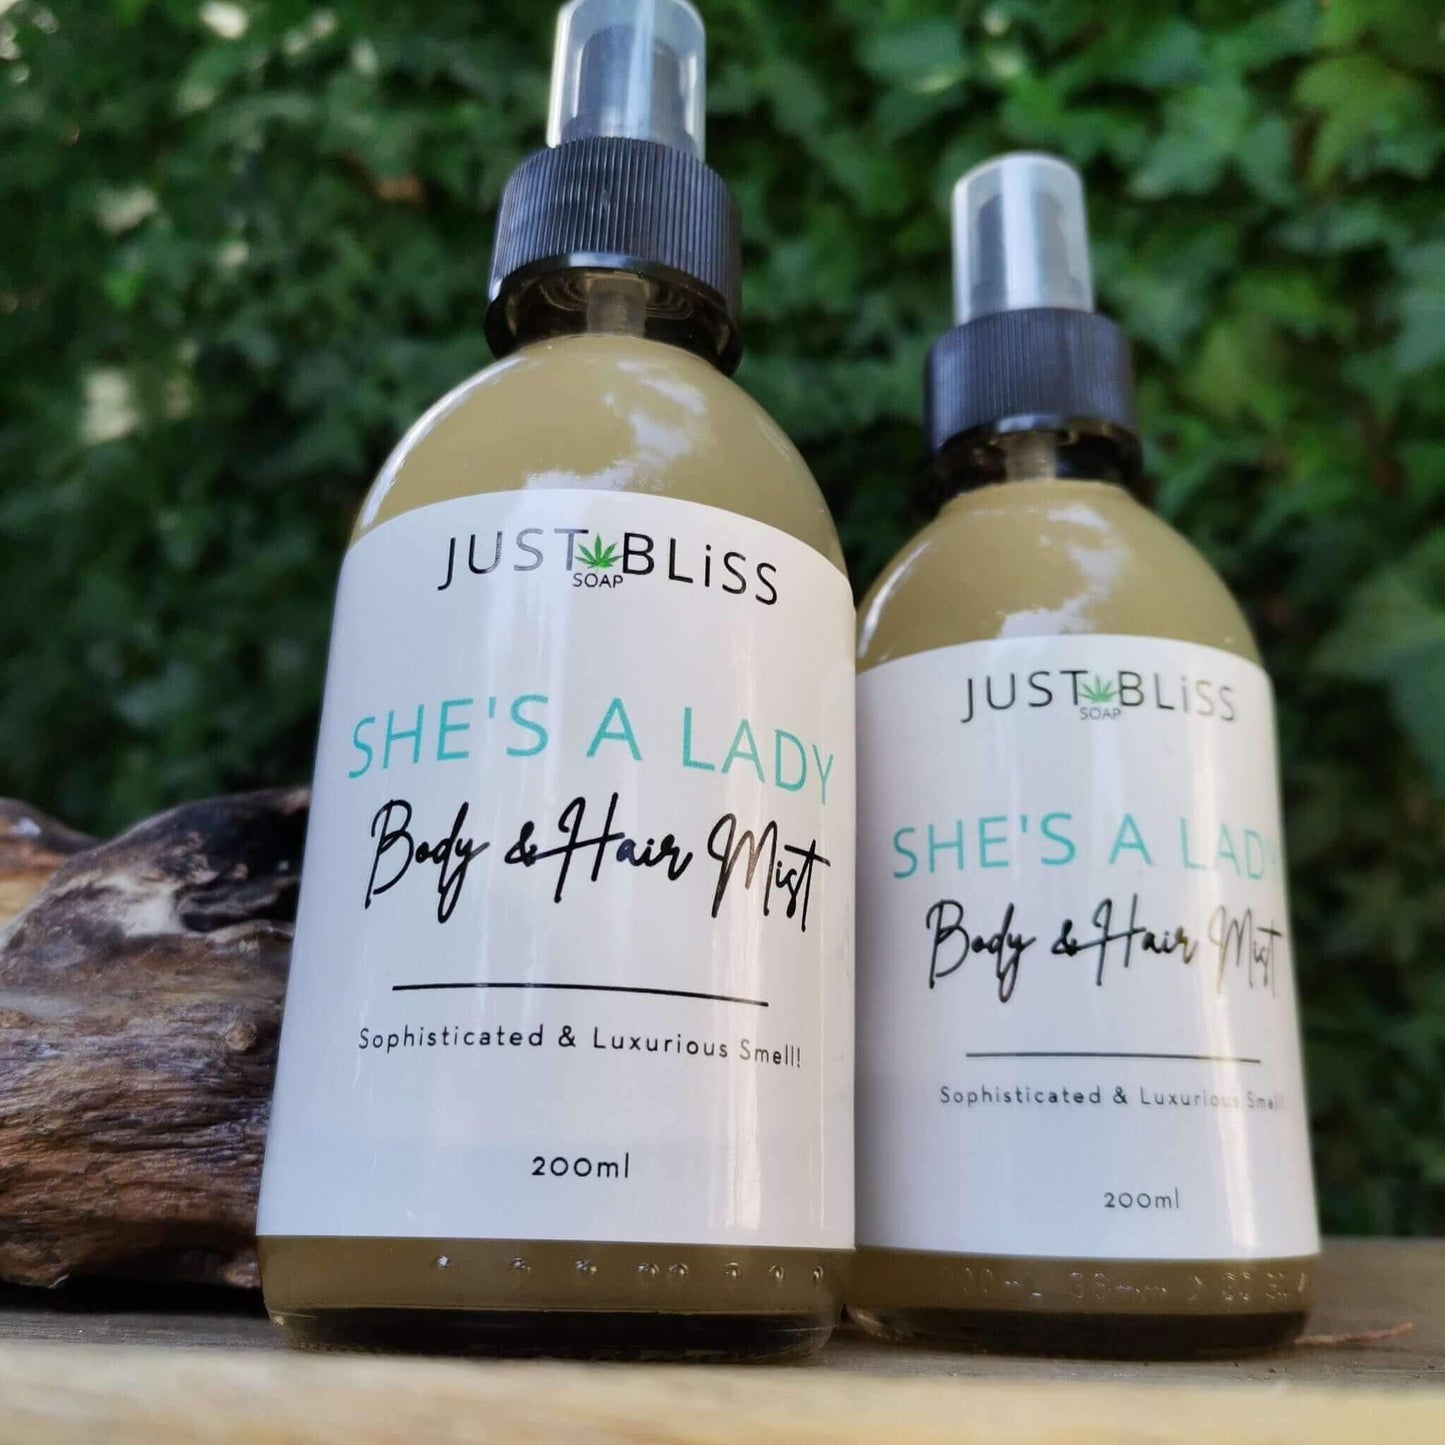 JUSTBLISS: body and hair mist: she's a lady